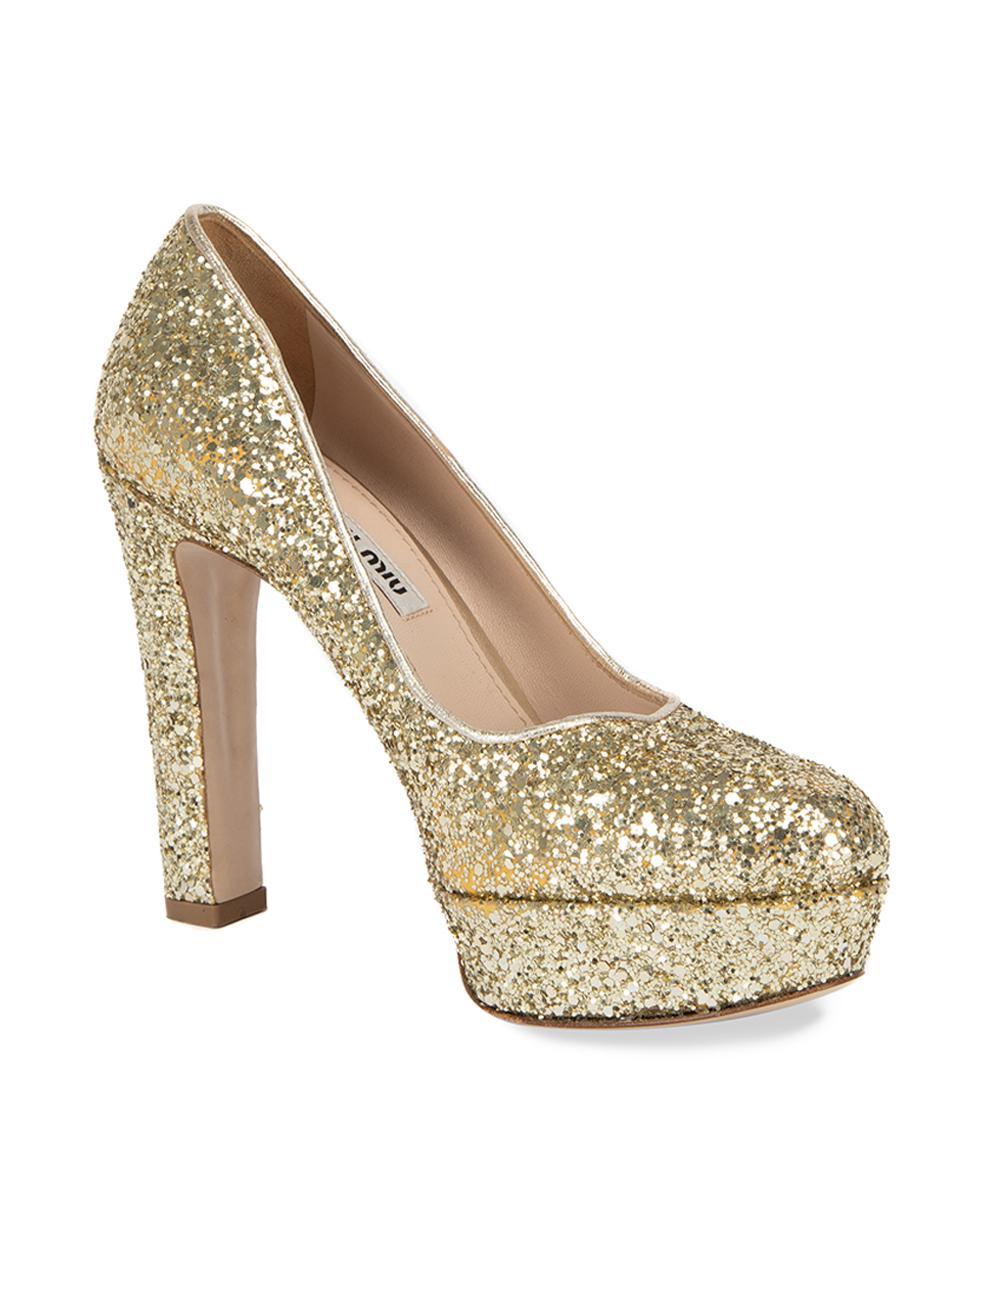 CONDITION is Very good. Minimal wear to shoes is evident. Some glitter has fallen off which is most evident around the inside of the left shoe on this used Miu Miu designer resale item.   Details  Gold Glitter Slip on heels Almond toe Platform high